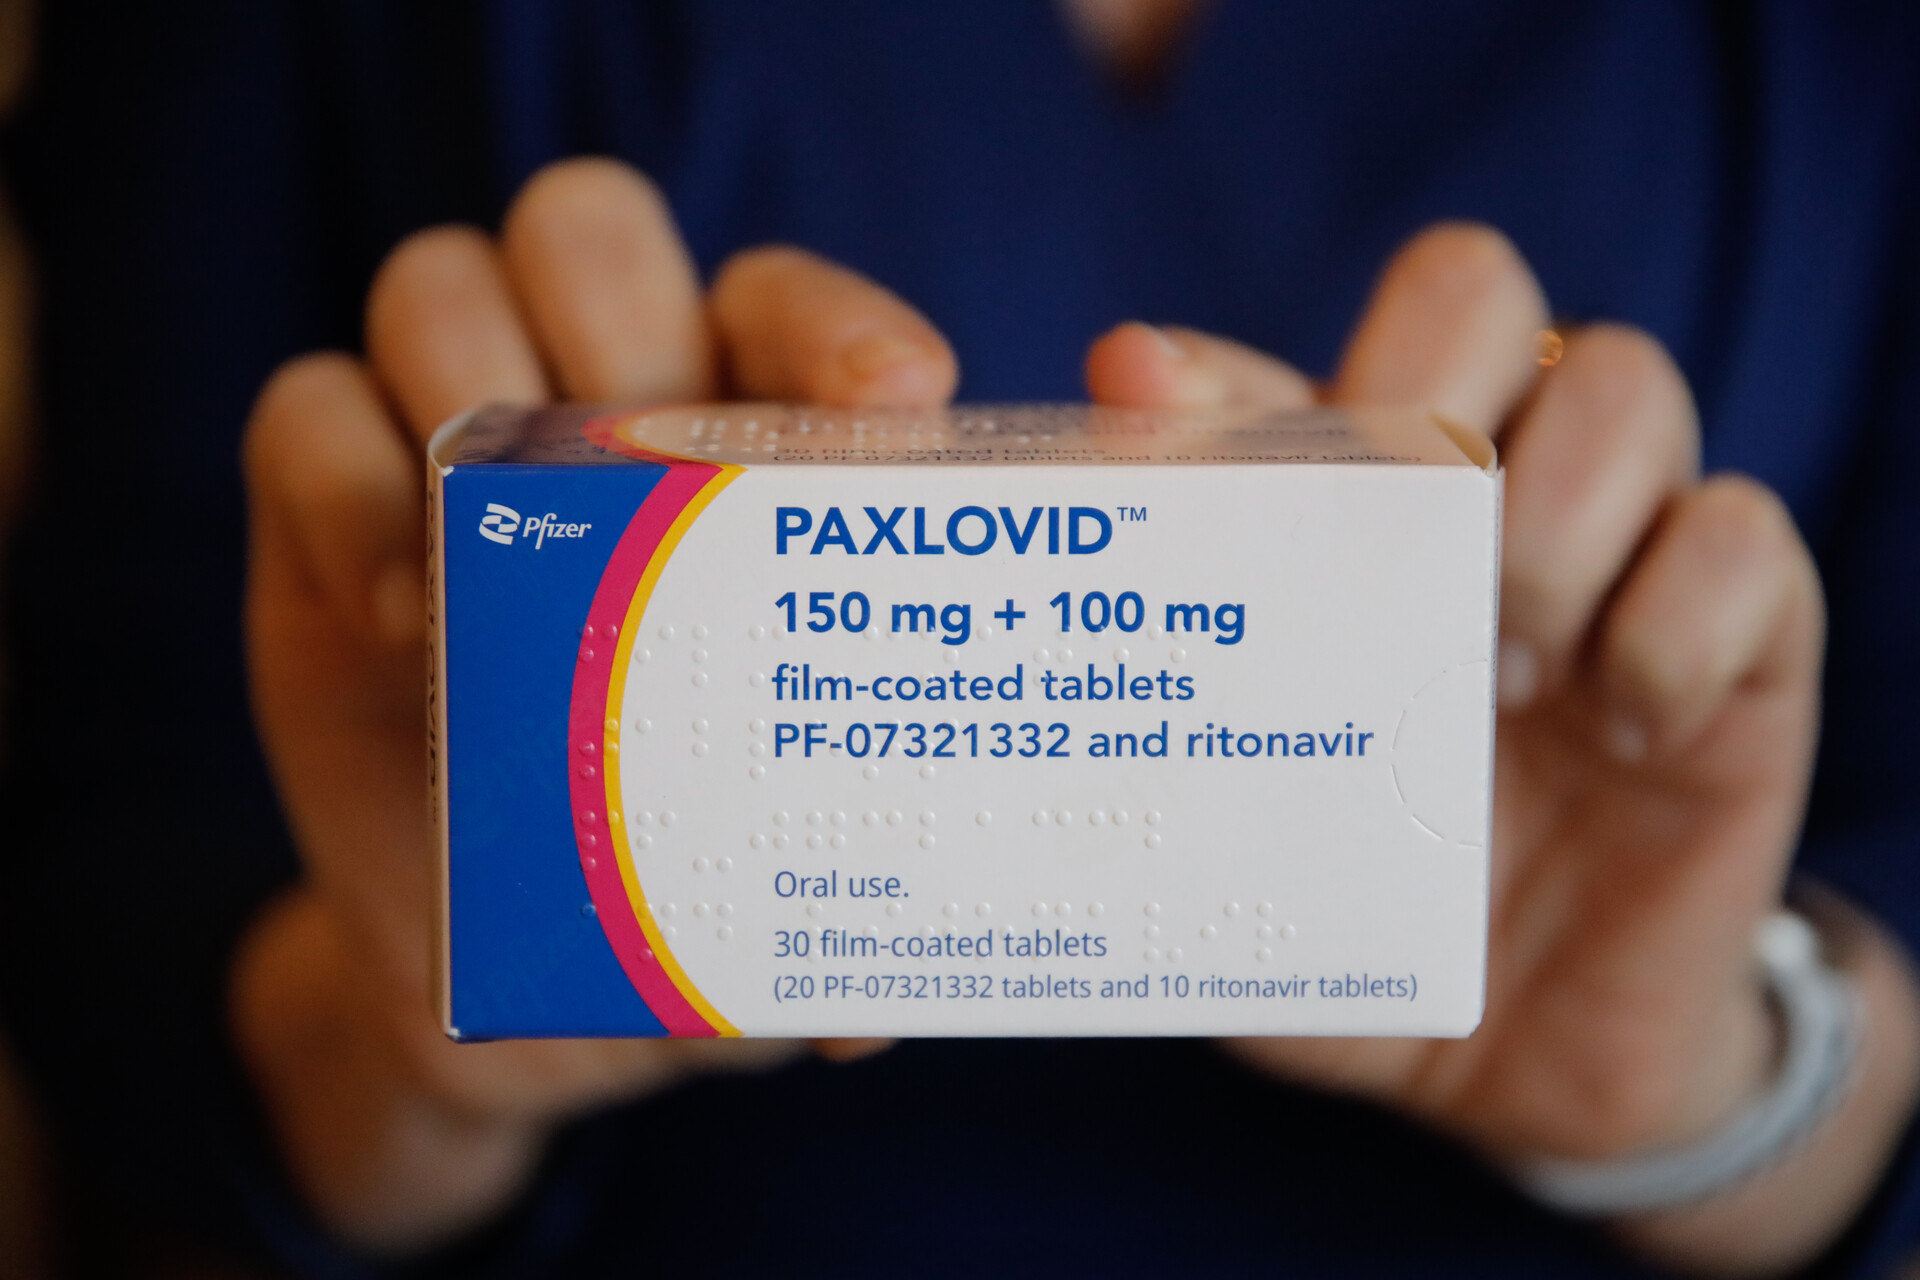 A box of the COVID antiviral drug Paxlovid, held up by two hands presumably belonging to a health care worker, because they're wearing blue scrubs. The box says "PAXLOVID 150 mg + 100 mg film-coated tablets".